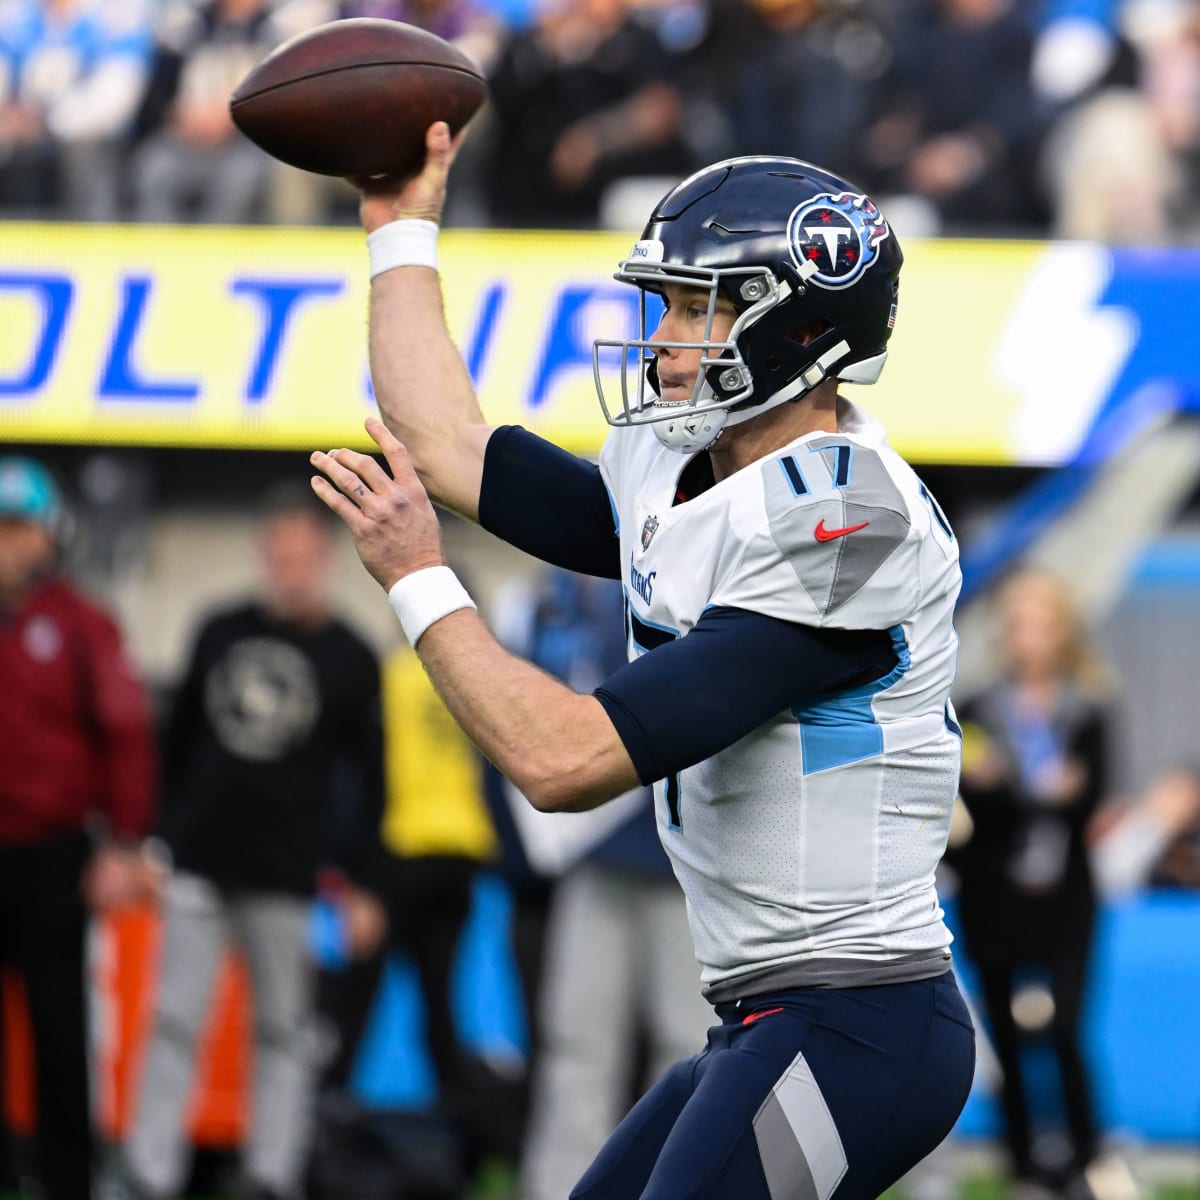 Can the Tennessee Titans find support in Memphis, or are hard feelings  still an issue?